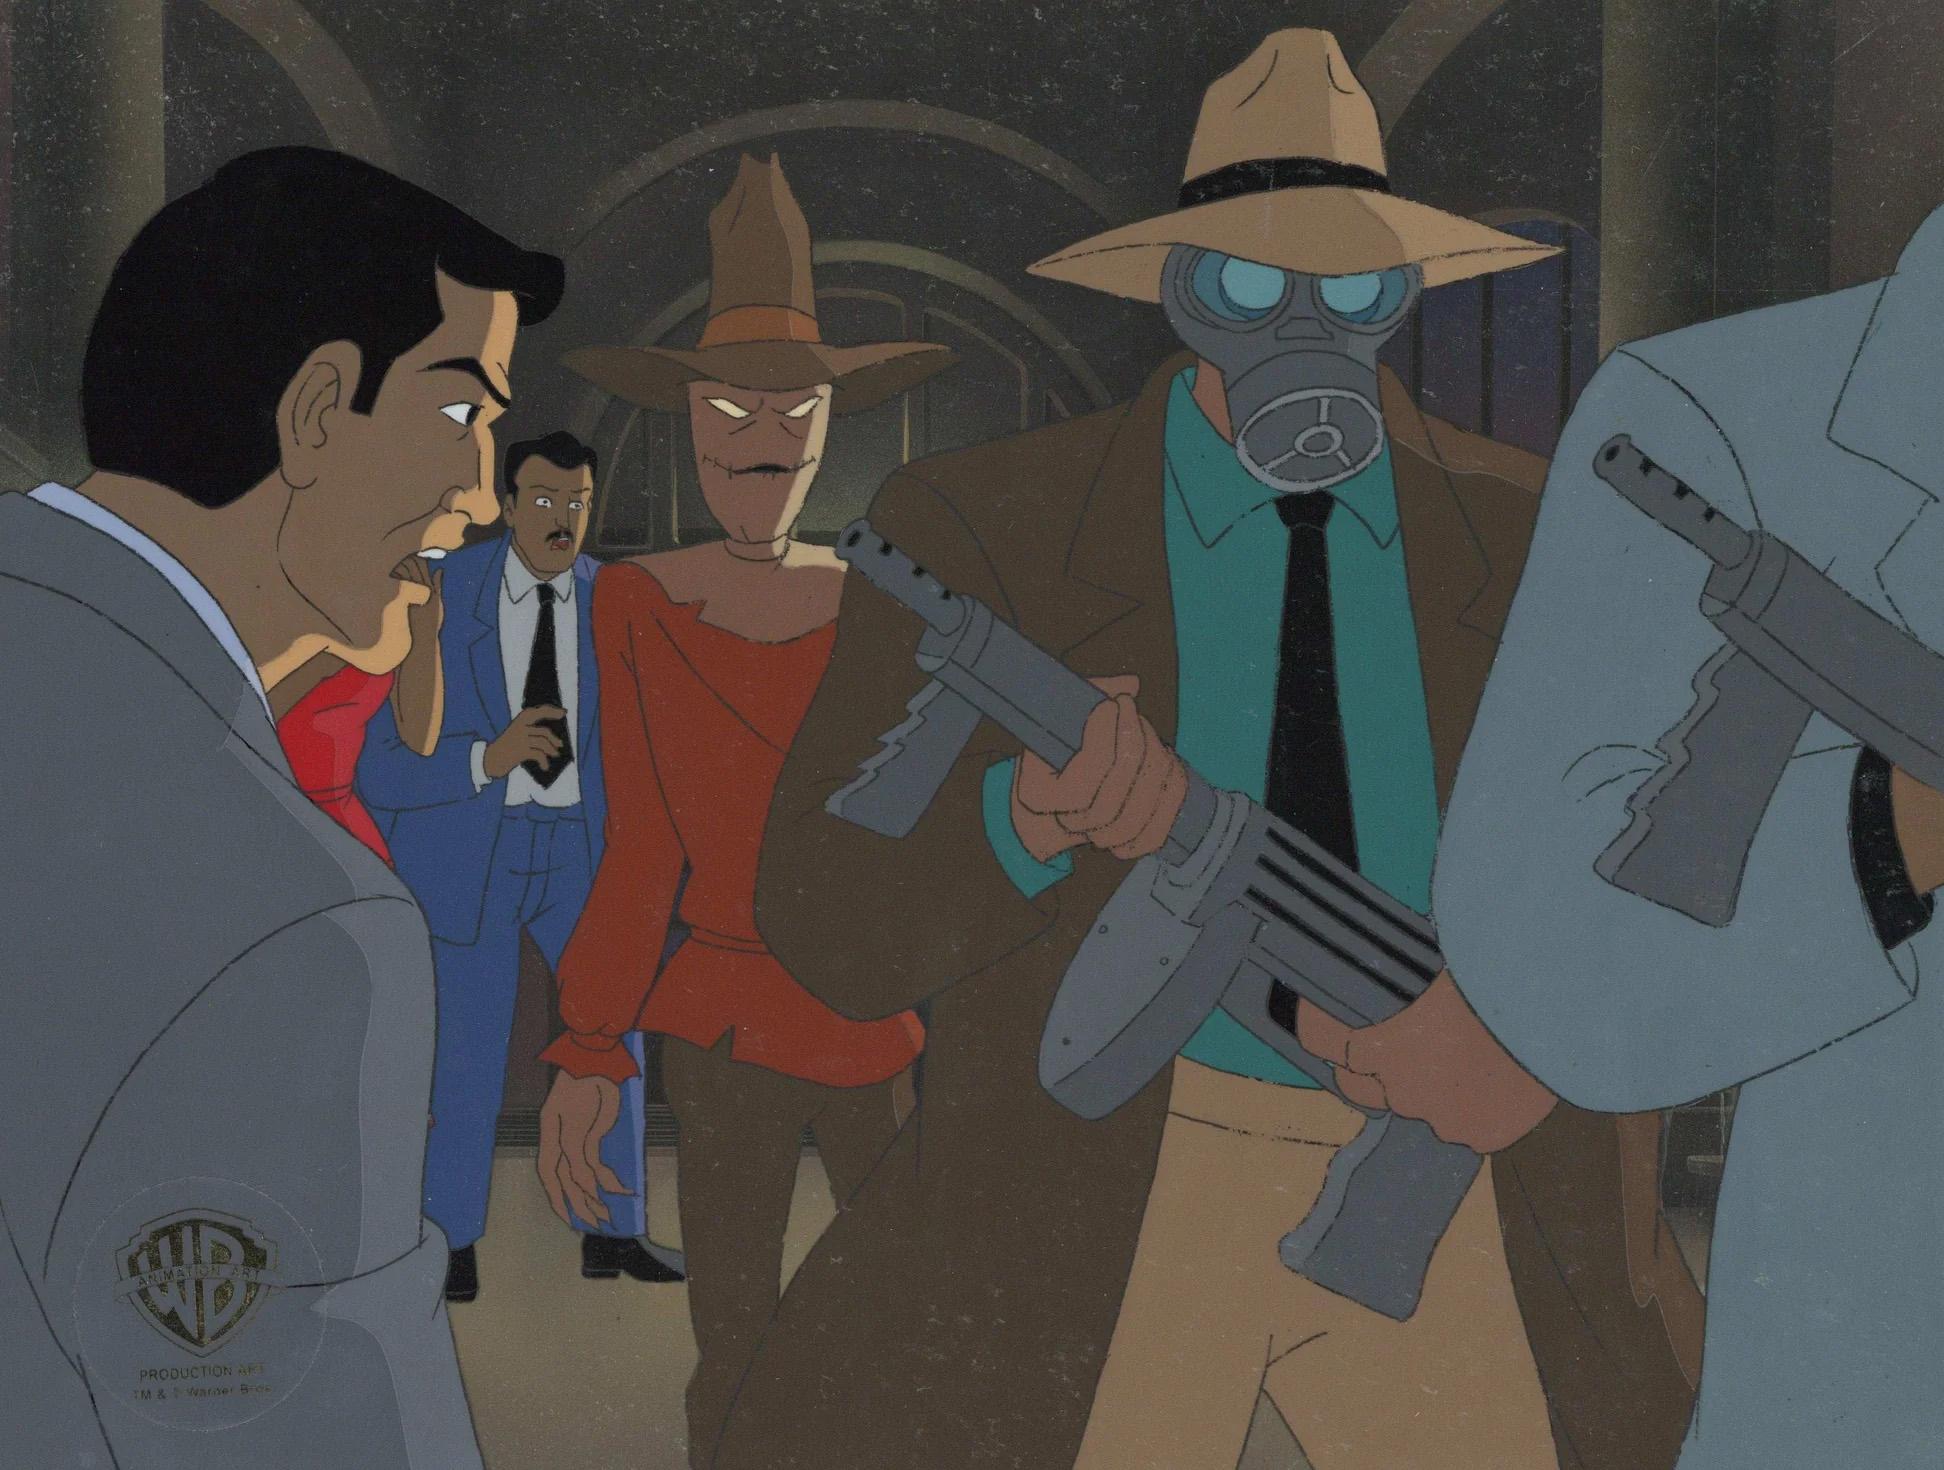 Batman The Animated Series Original Cel and Background: Scarecrow - Art by DC Comics Studio Artists